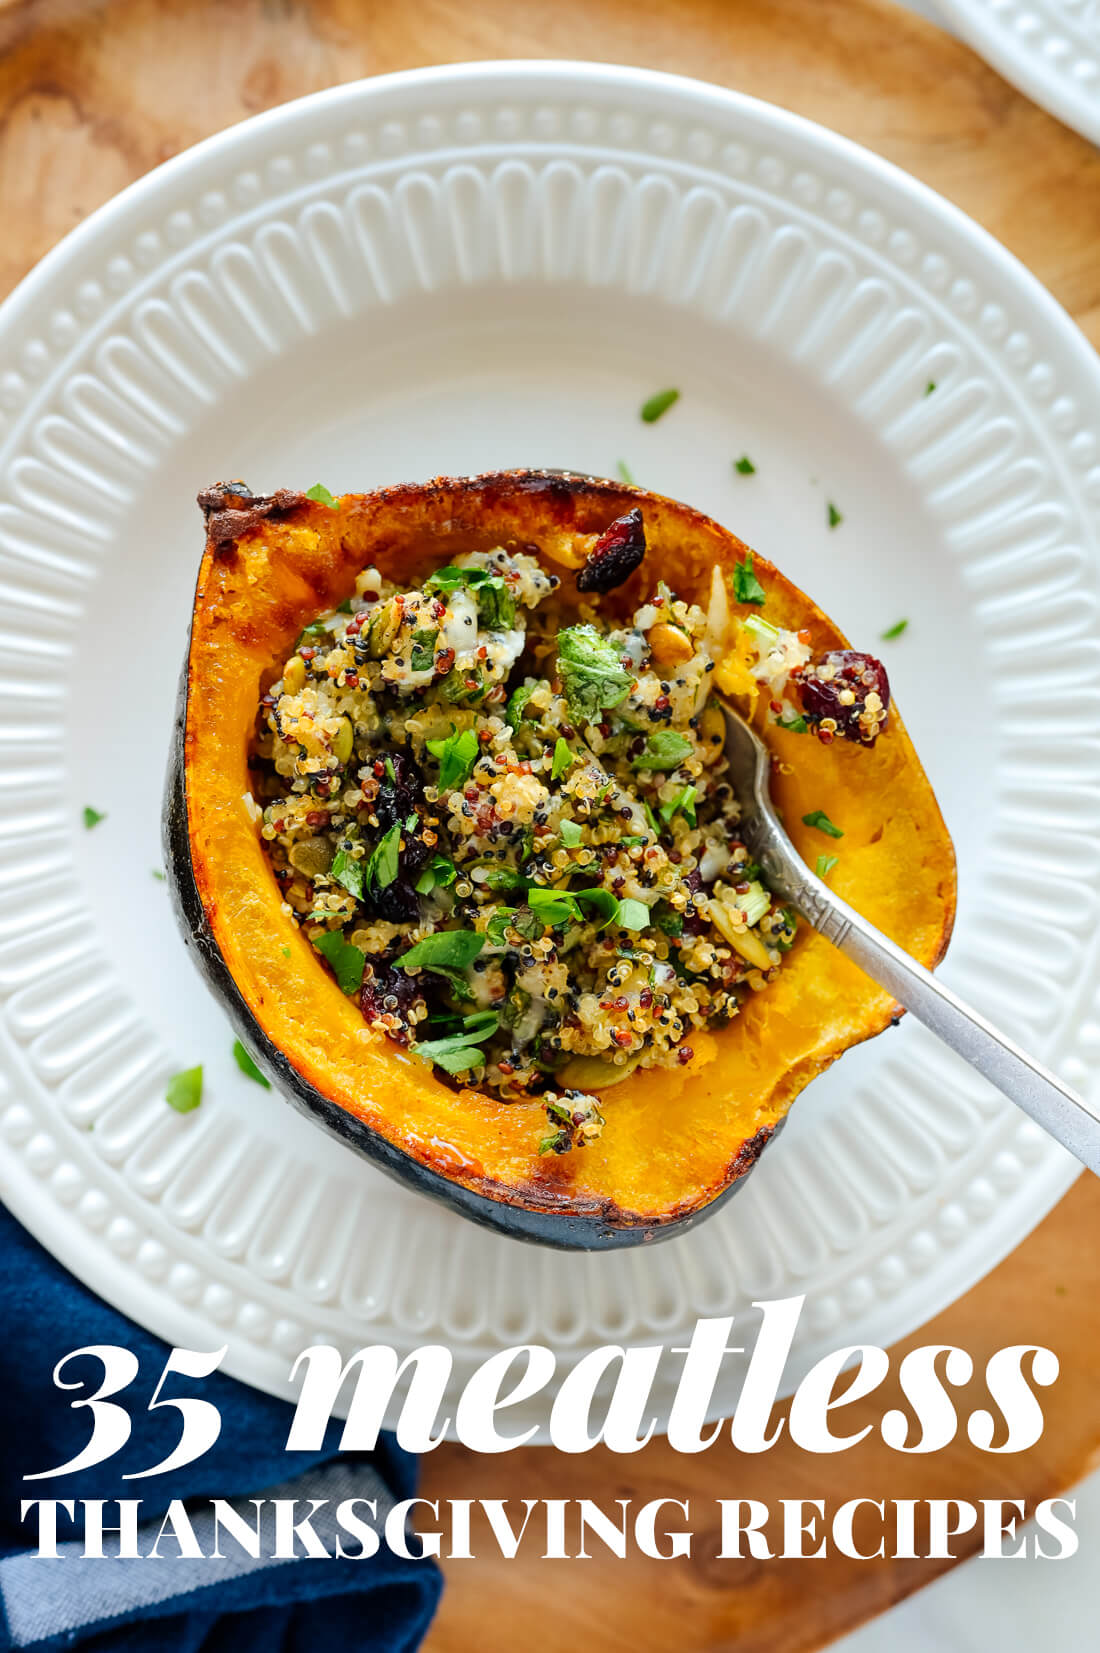 35 Vegetarian Thanksgiving Recipes - Cookie and Kate